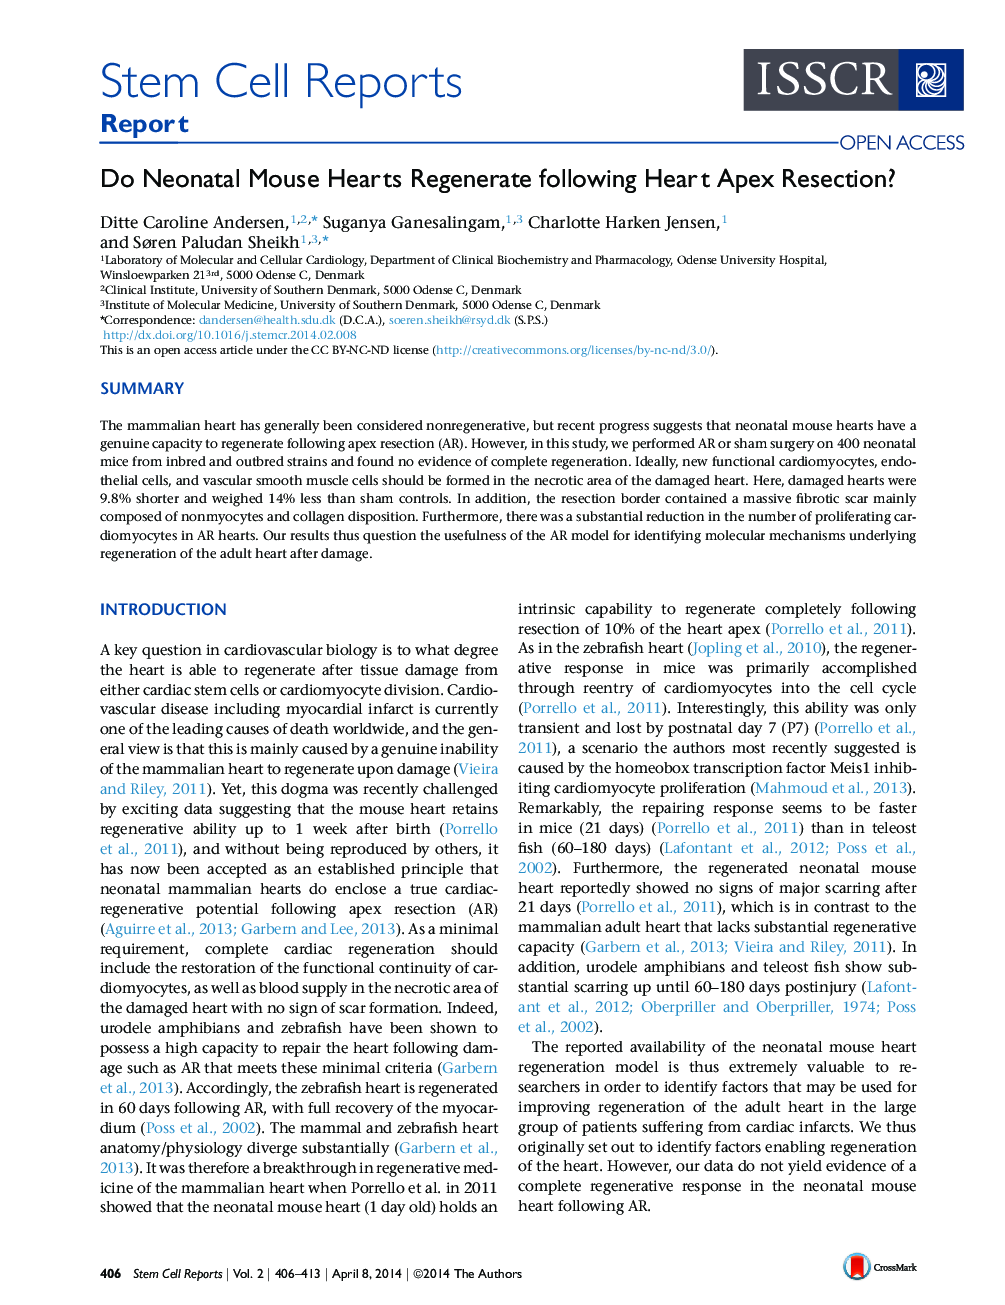 Do Neonatal Mouse Hearts Regenerate following Heart Apex Resection? 